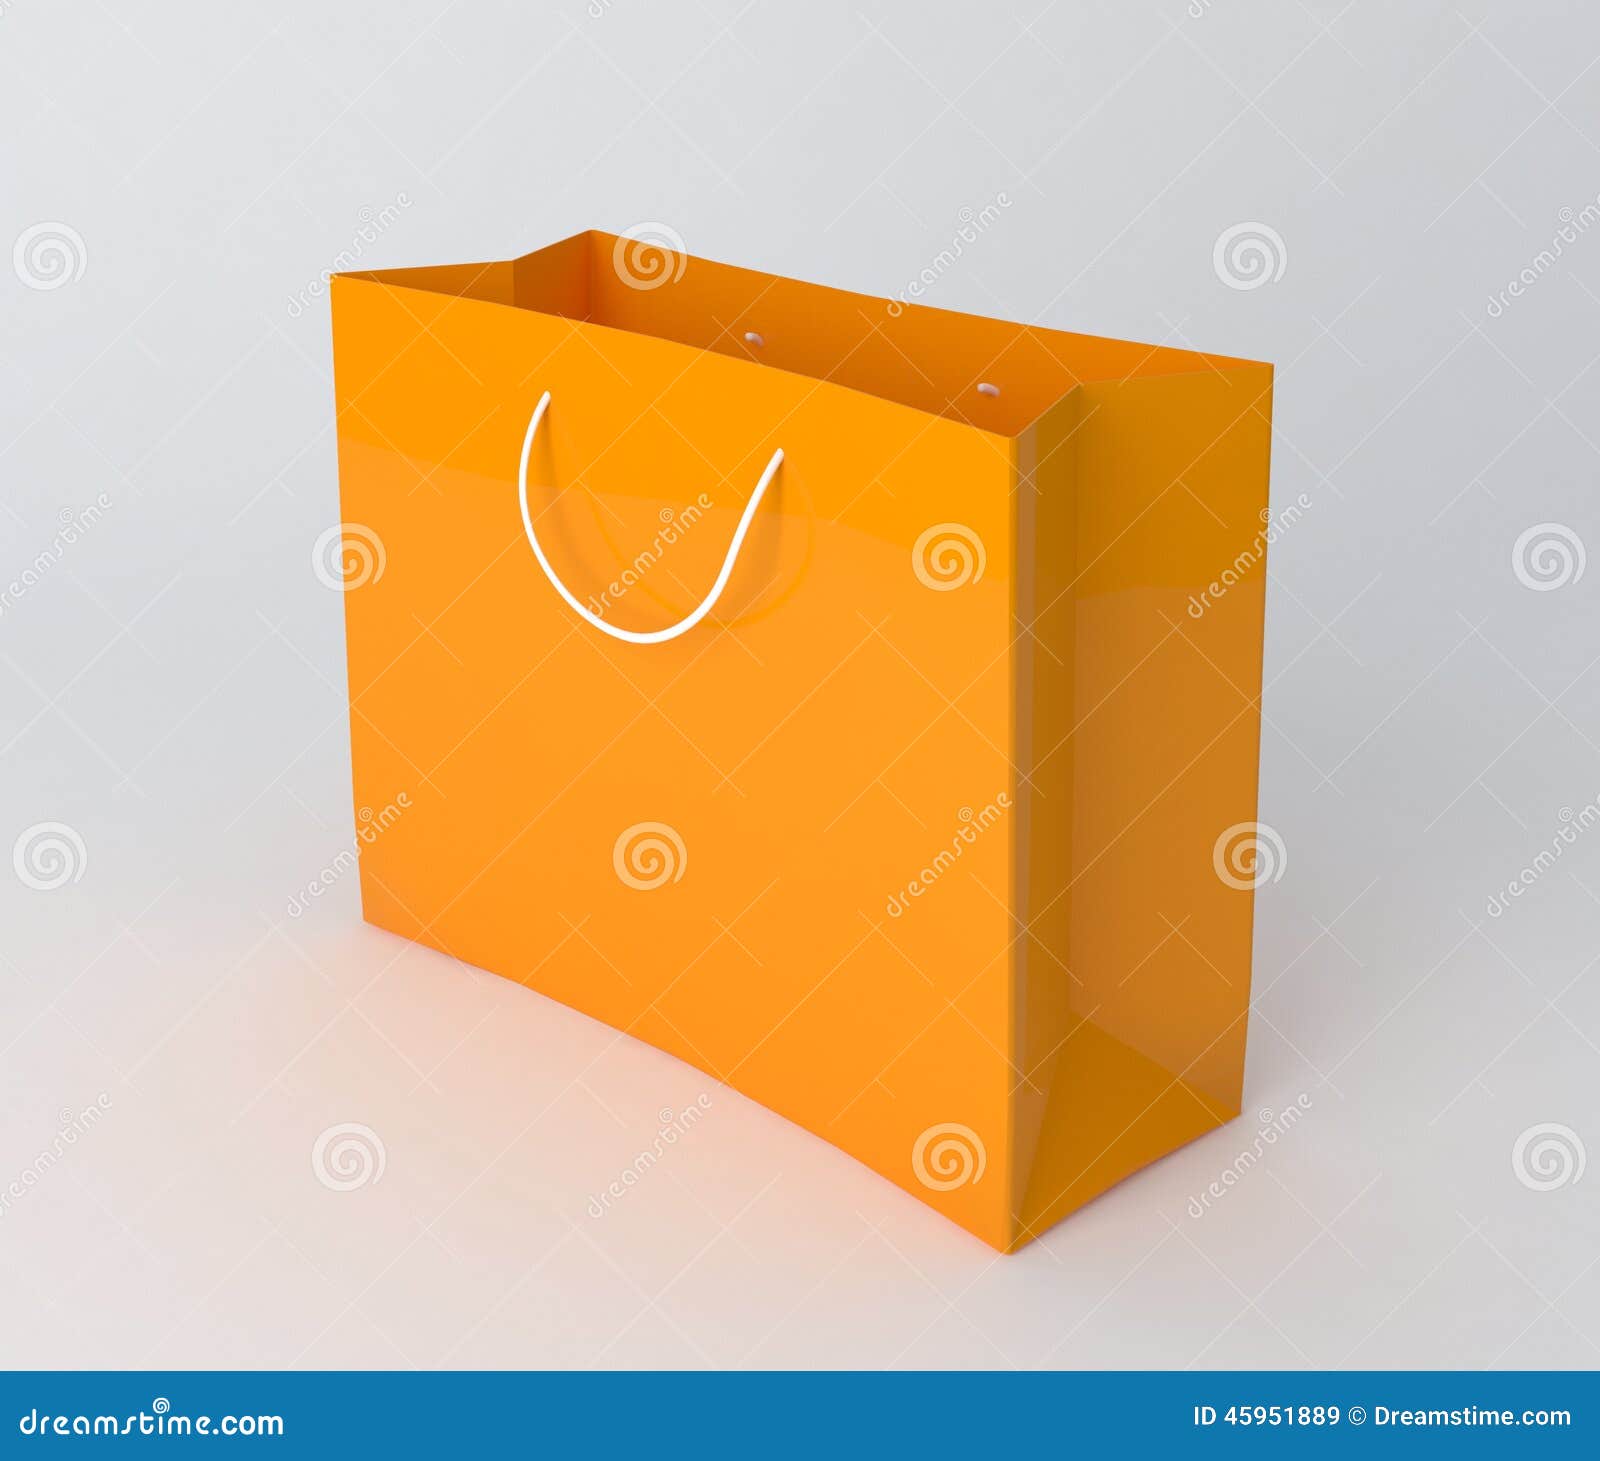 Premium Photo  Paper shopping bag with persent symbol 3d render